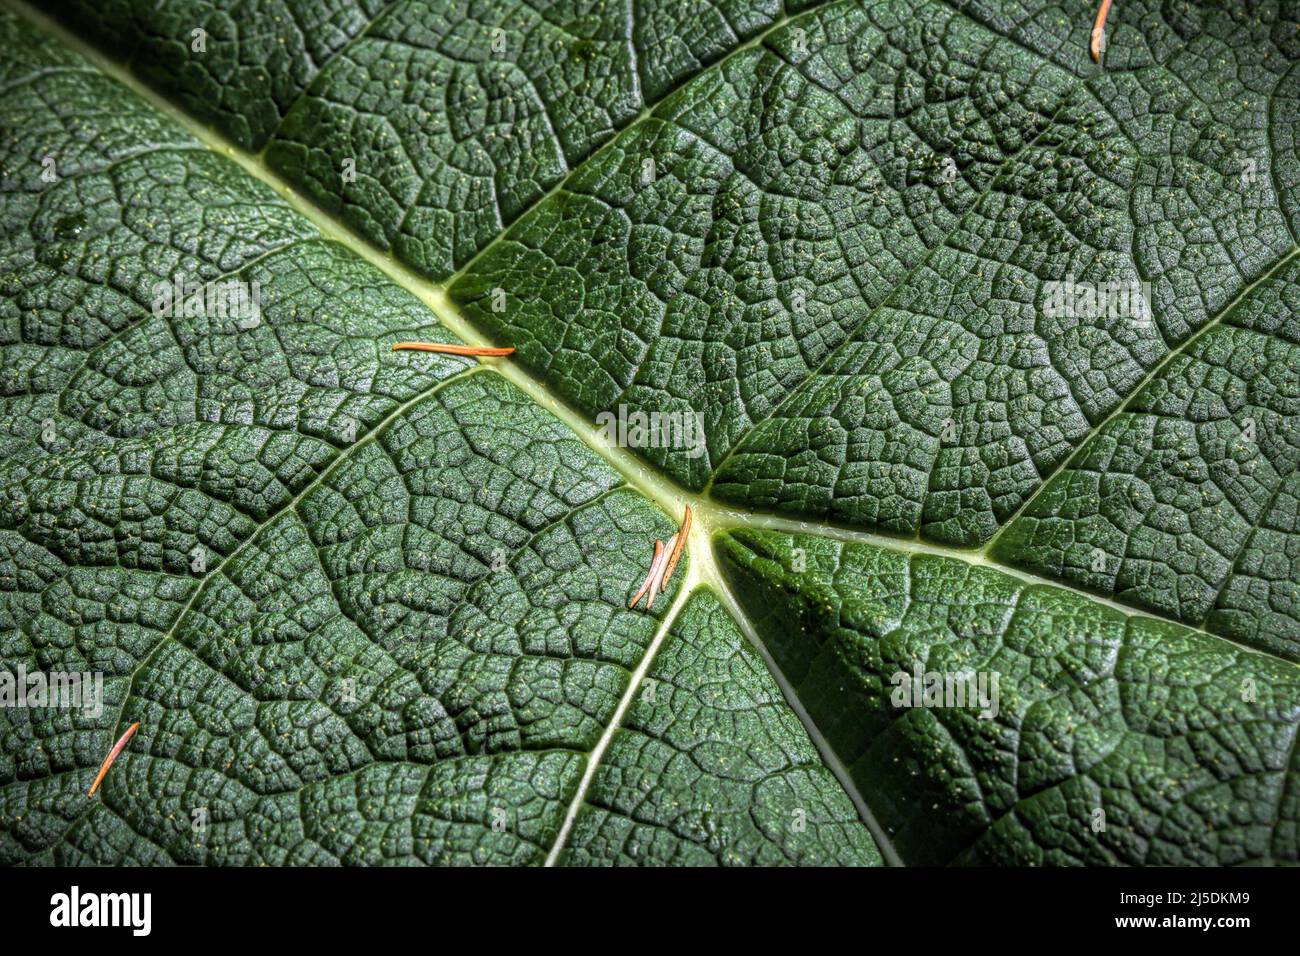 Giant rhubarb leaf close-up looks like drone view of grassy hills with milky rivers and creeks Stock Photo